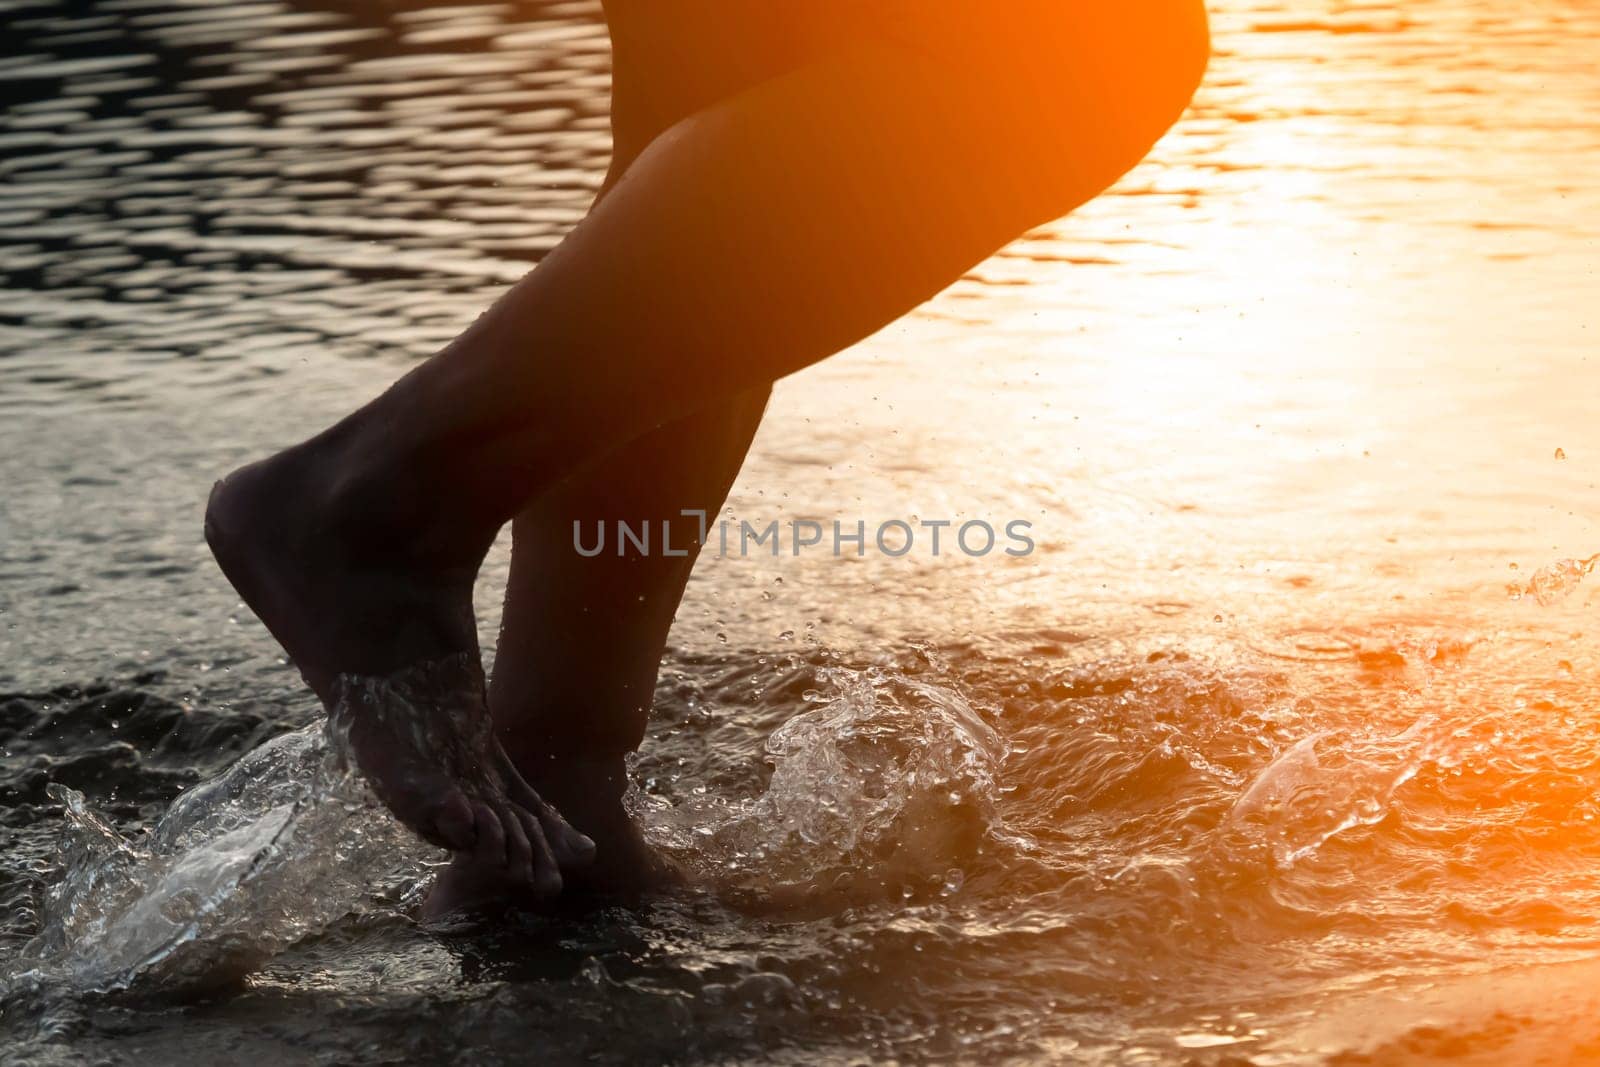 A person runs along the beach on the water, the sea or ocean in the rays of the sun, an athlete man spends time happily, is training, jogging outdoors, close-up view of the legs and splashes.